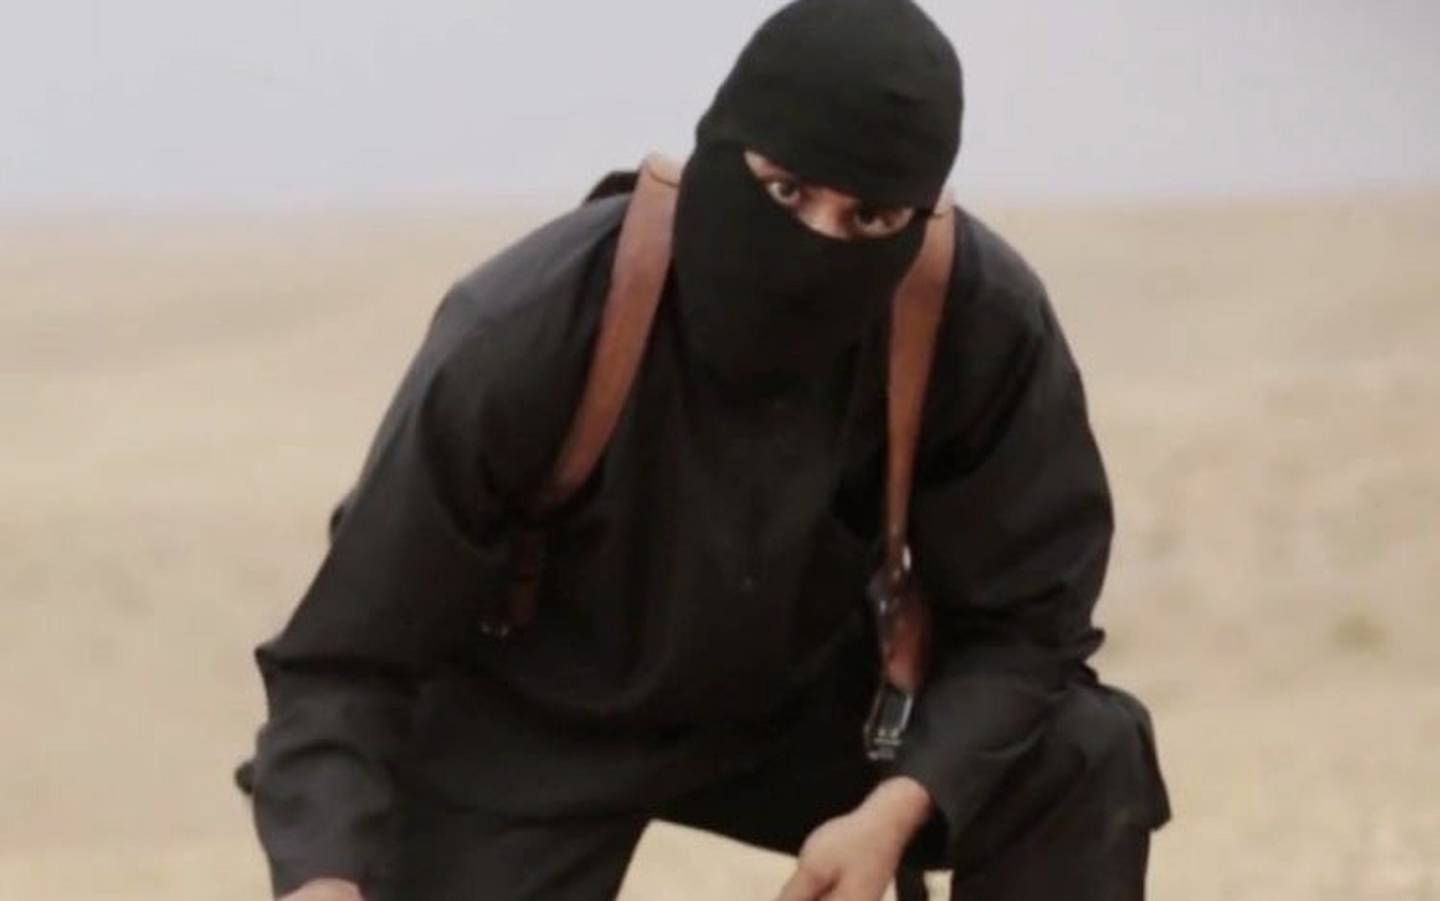 In 2015, a Cage official described ISIS terrorist Mohammed Emwazi as a 'beautiful young man'